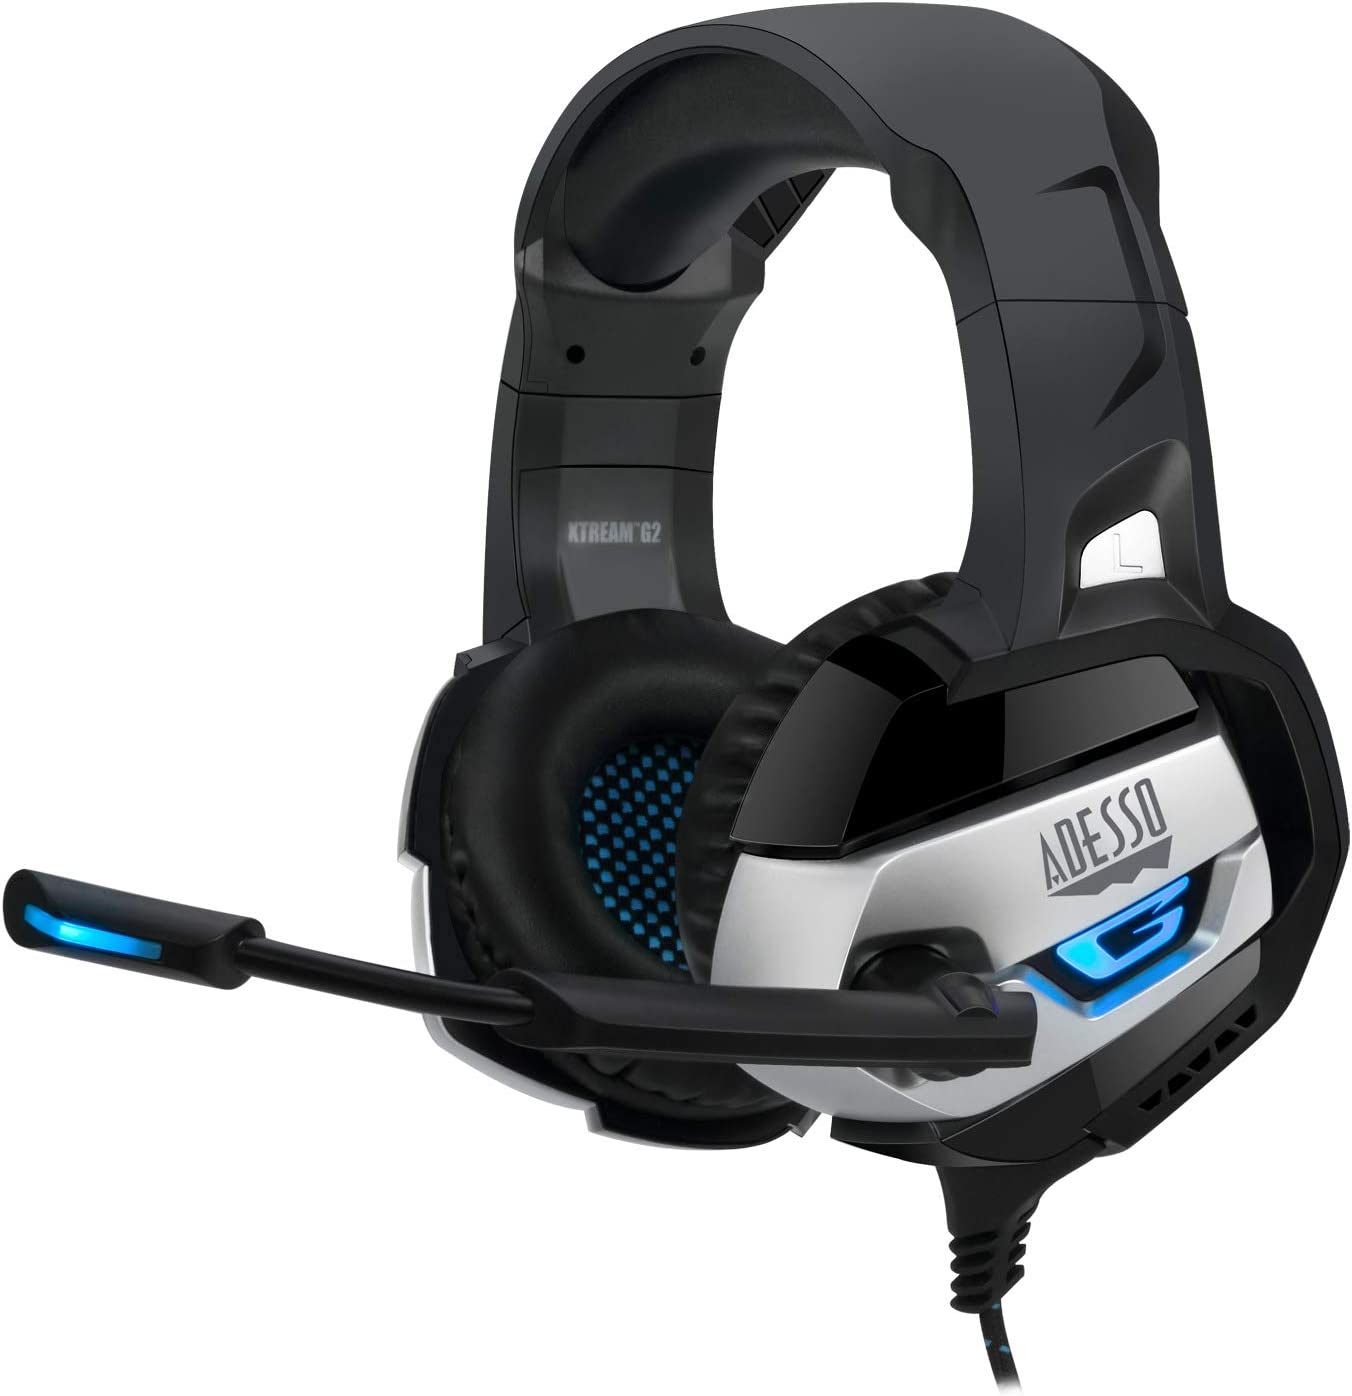 Adesso Xtream G2 USB Stereo Headset with Microphone, Over the Head Design - MIC-XTREAMG2